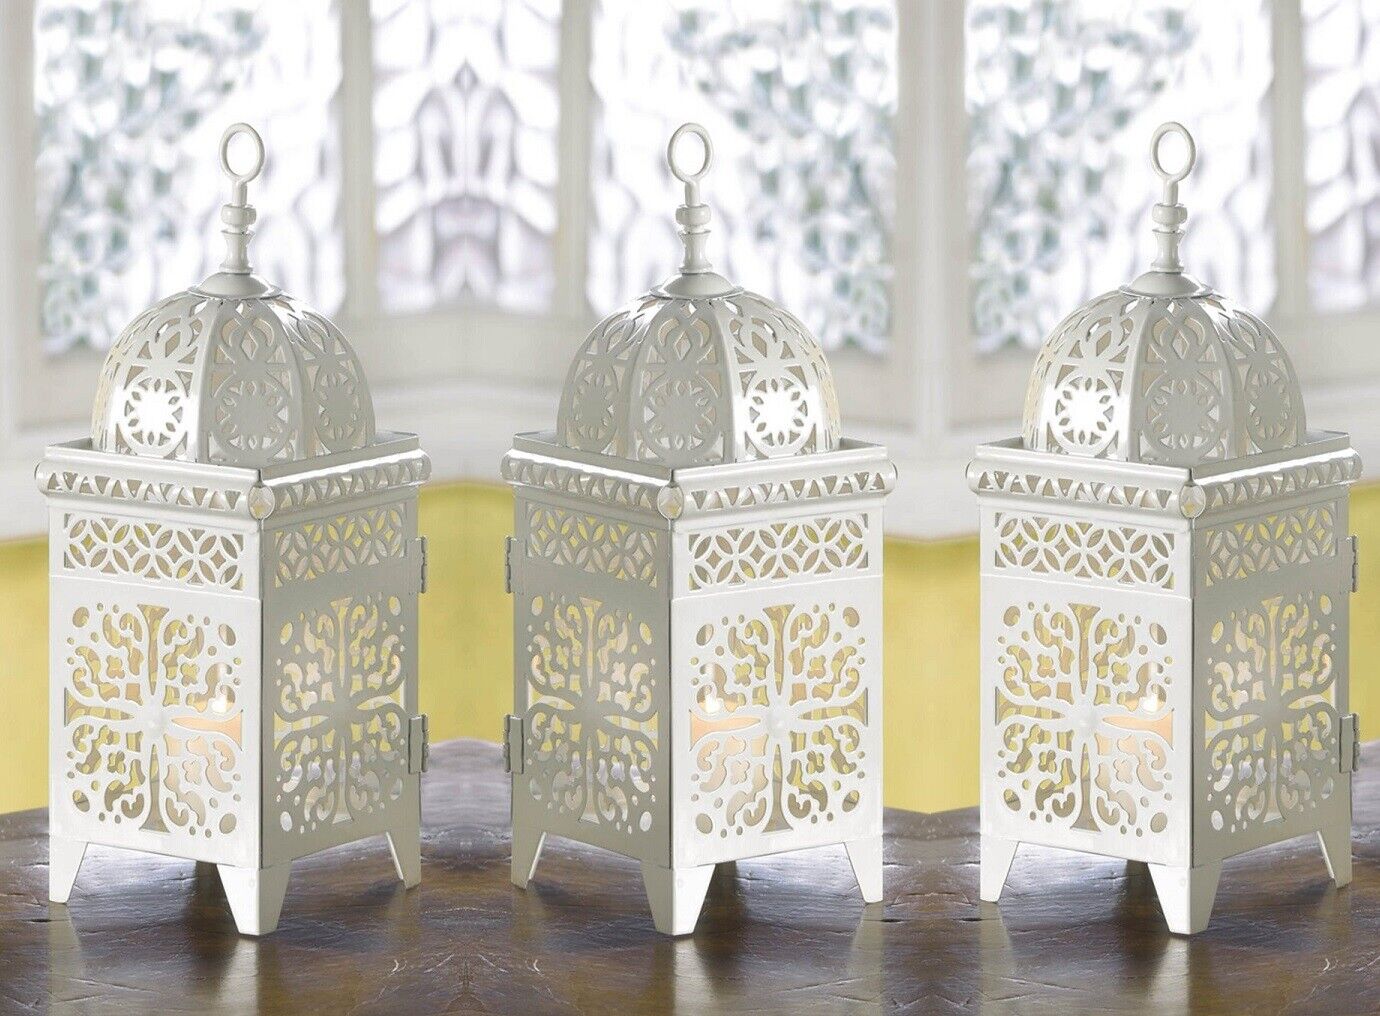 10 LOT WHITE MOROCCAN SCROLLWORK LANTERN CANDLE HOLDER WEDDING TABLE CENTERPIECE Gallery Of light